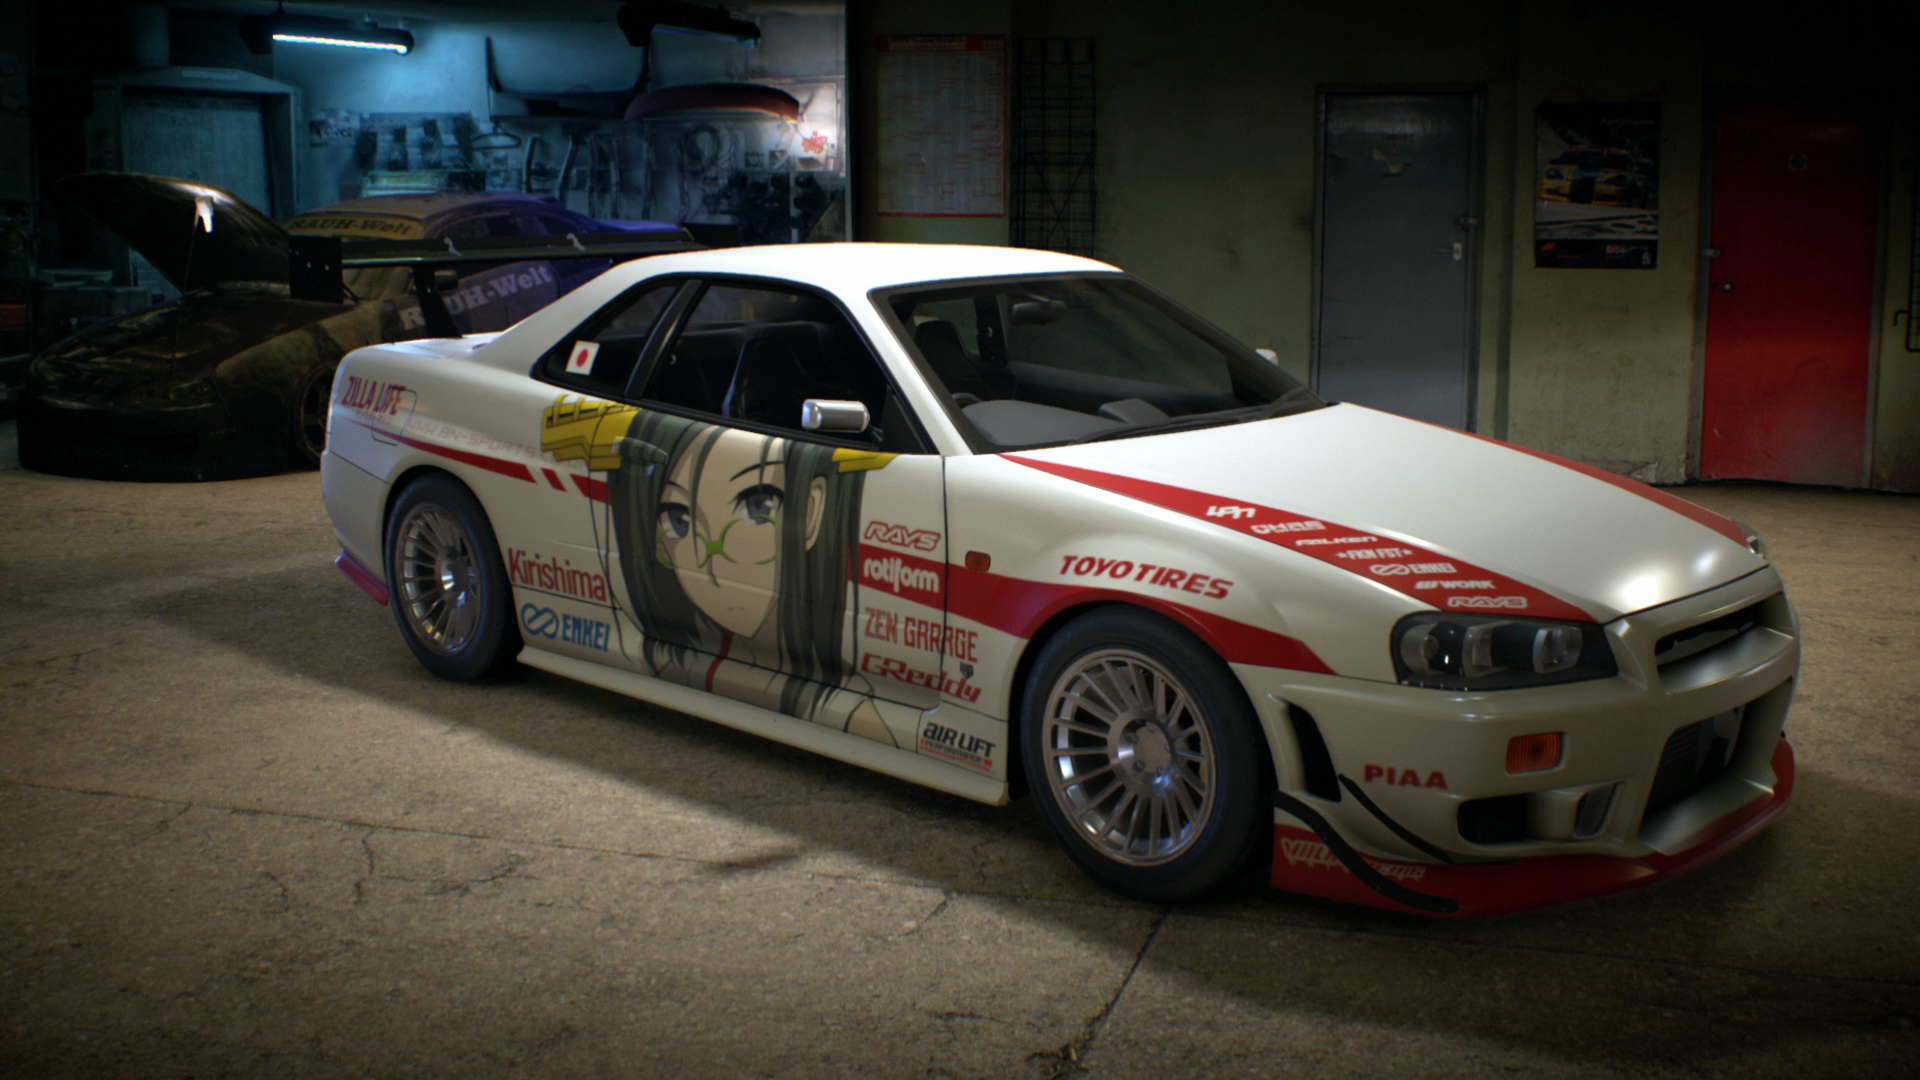 General 1920x1080 Need for Speed Need for Speed 2015 car Itasha Nissan Nissan Skyline Nissan Skyline R34 video games